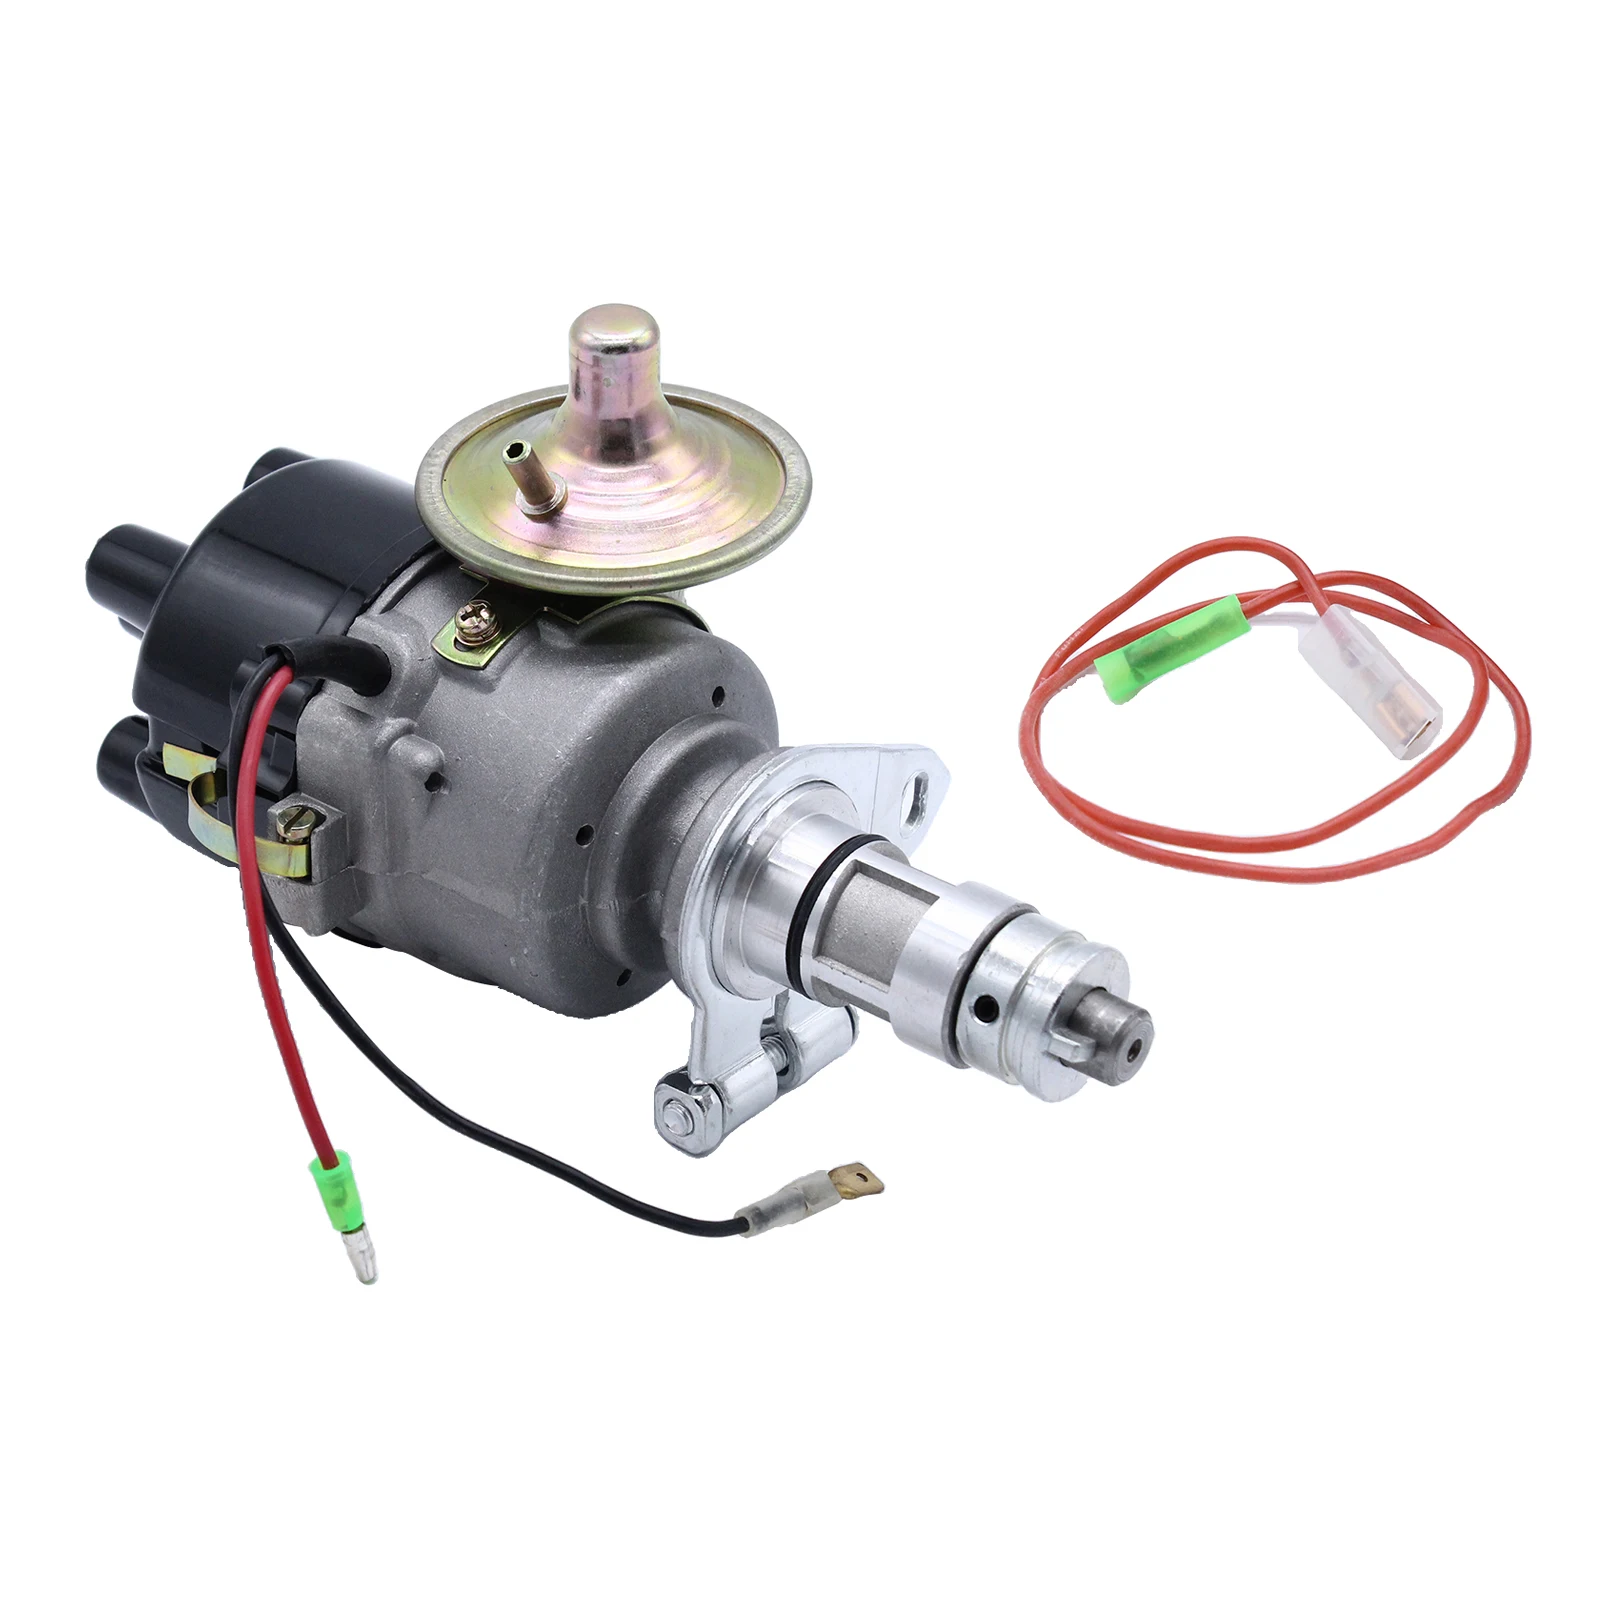 Automotive Car 4 Cylinder Electronic Distributor Replacement for Lucas 45D 25D